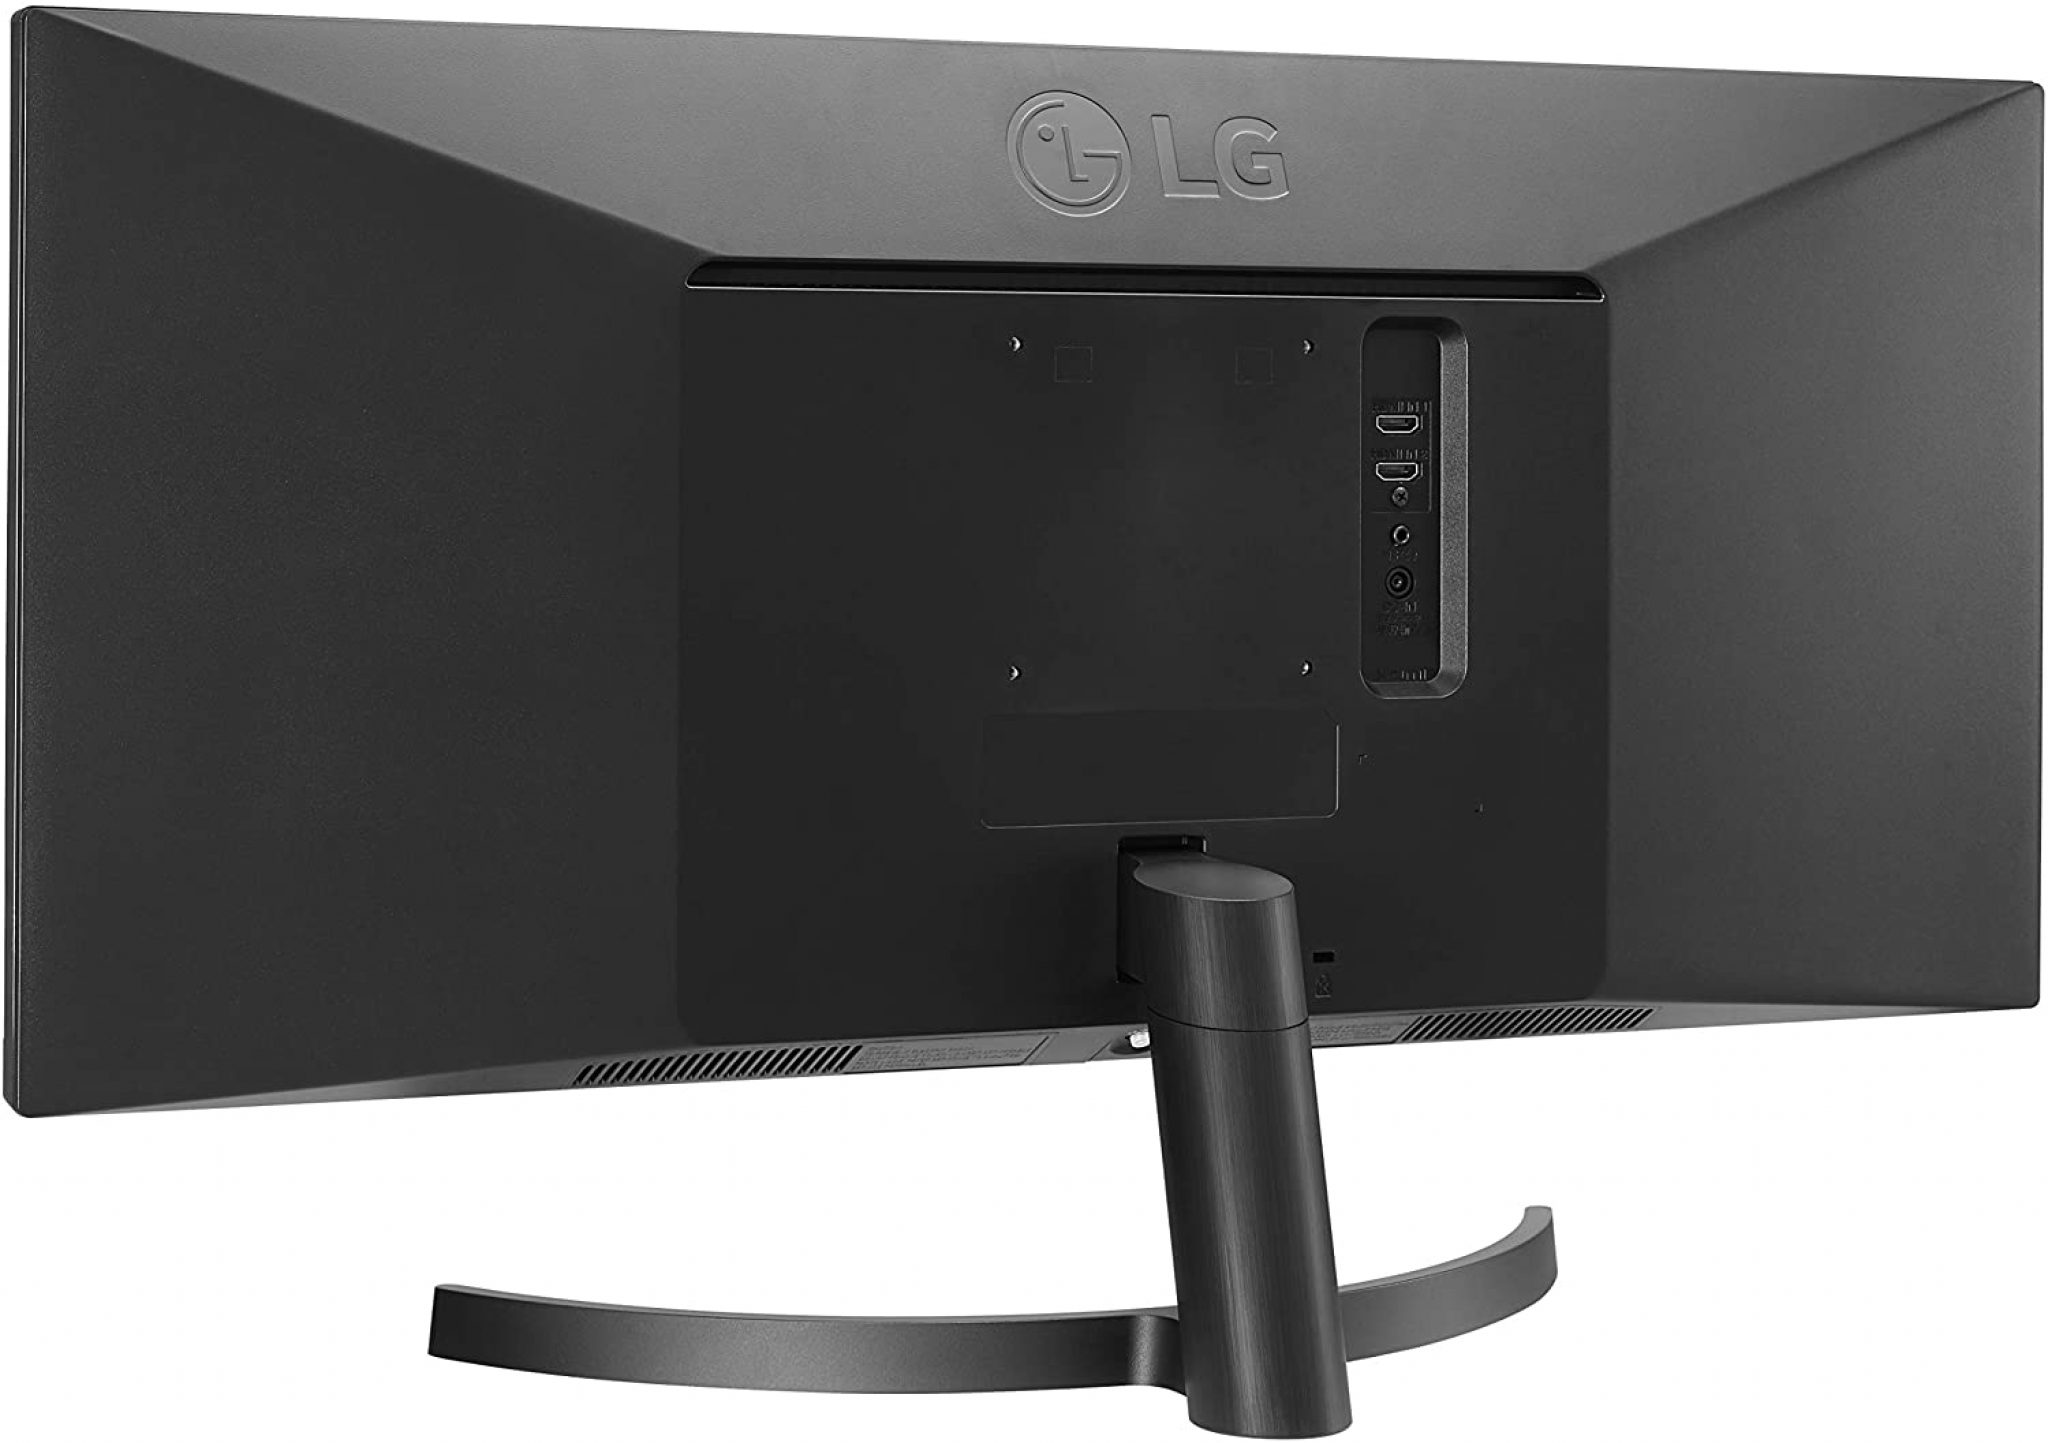 LG 29WL500 29" UltraWide Full HD IPS Monitor with HDR 10 - Altech